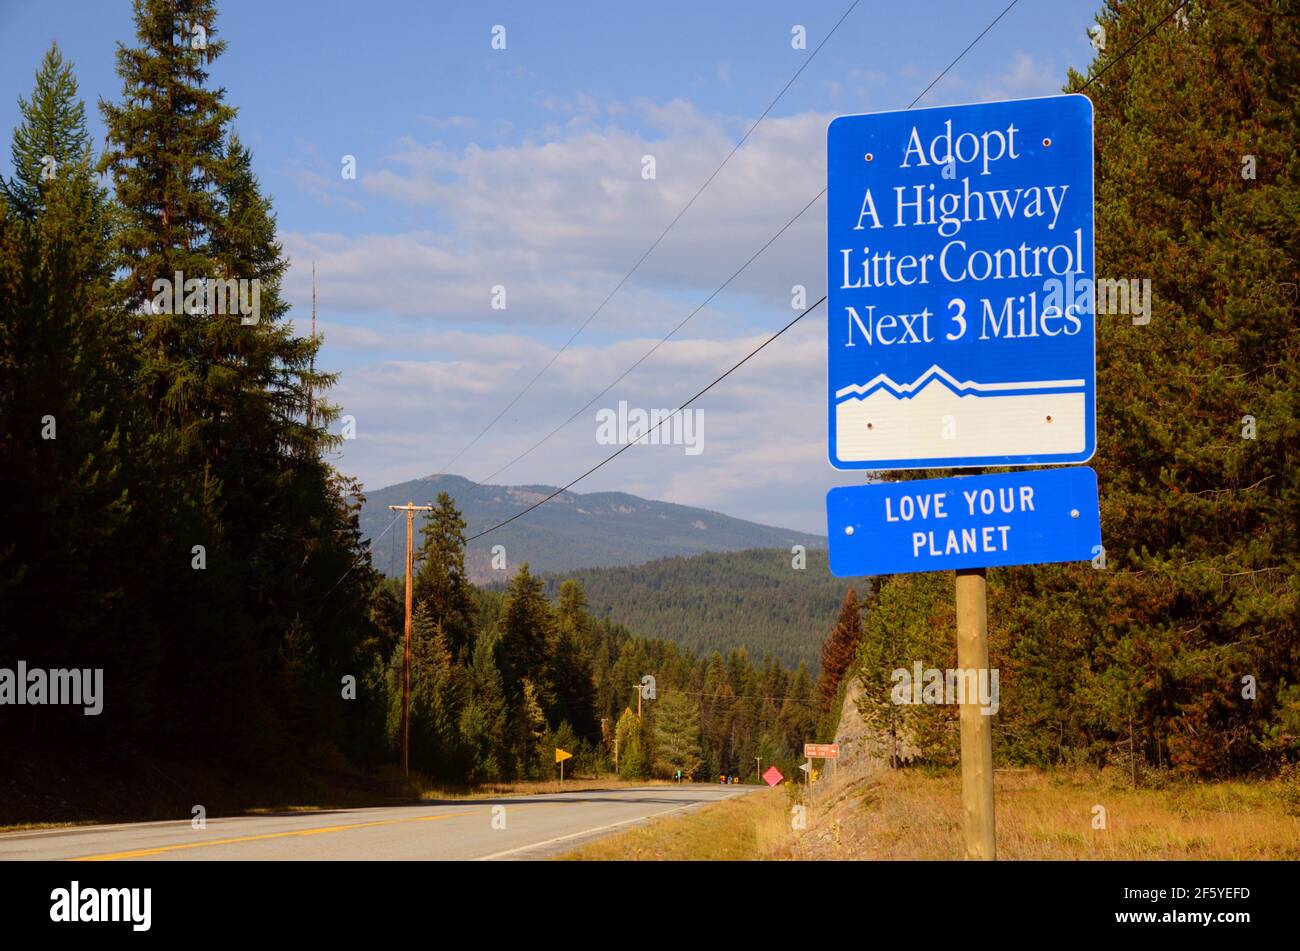 https://c8.alamy.com/comp/2F5YEFD/love-your-planet-adopt-a-highway-sign-along-the-yaak-river-road-yaak-valley-northwest-montana-photo-by-randy-beacham-2F5YEFD.jpg